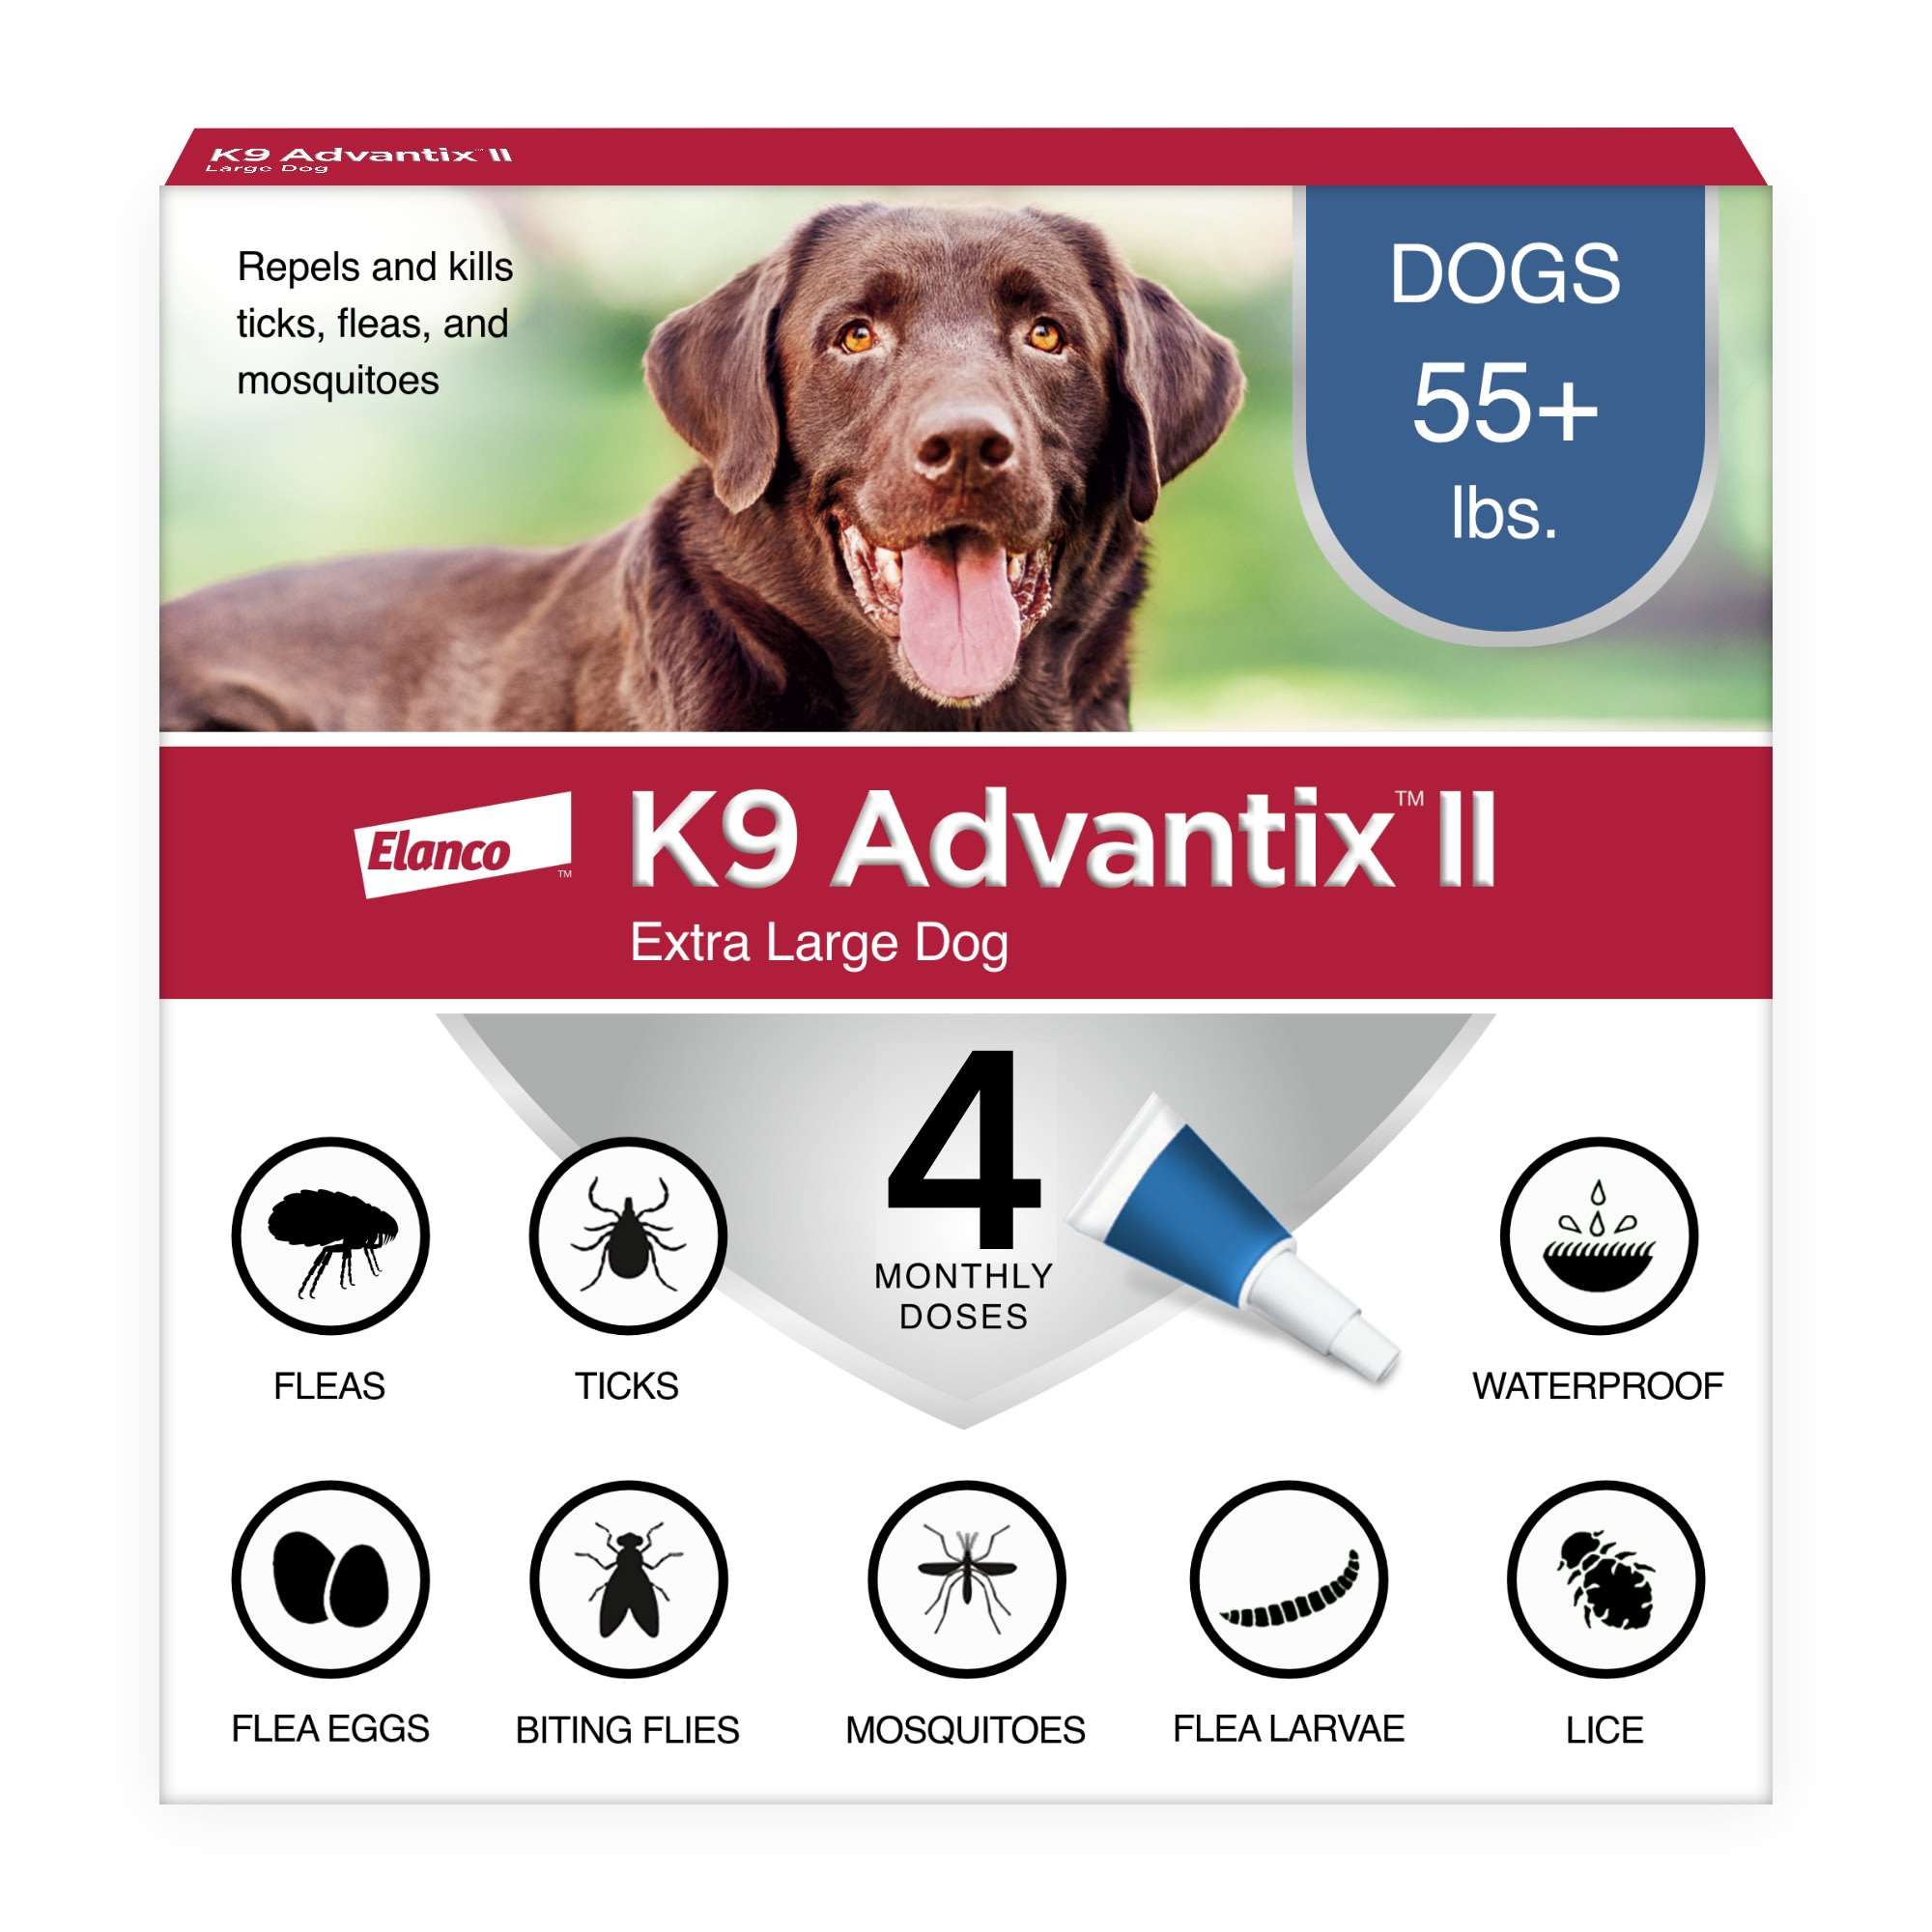 K9 Advantix II Vet-Recommended Flea, Tick & Mosquito Treatment & Prevention for X-Large Dogs, Count of 4